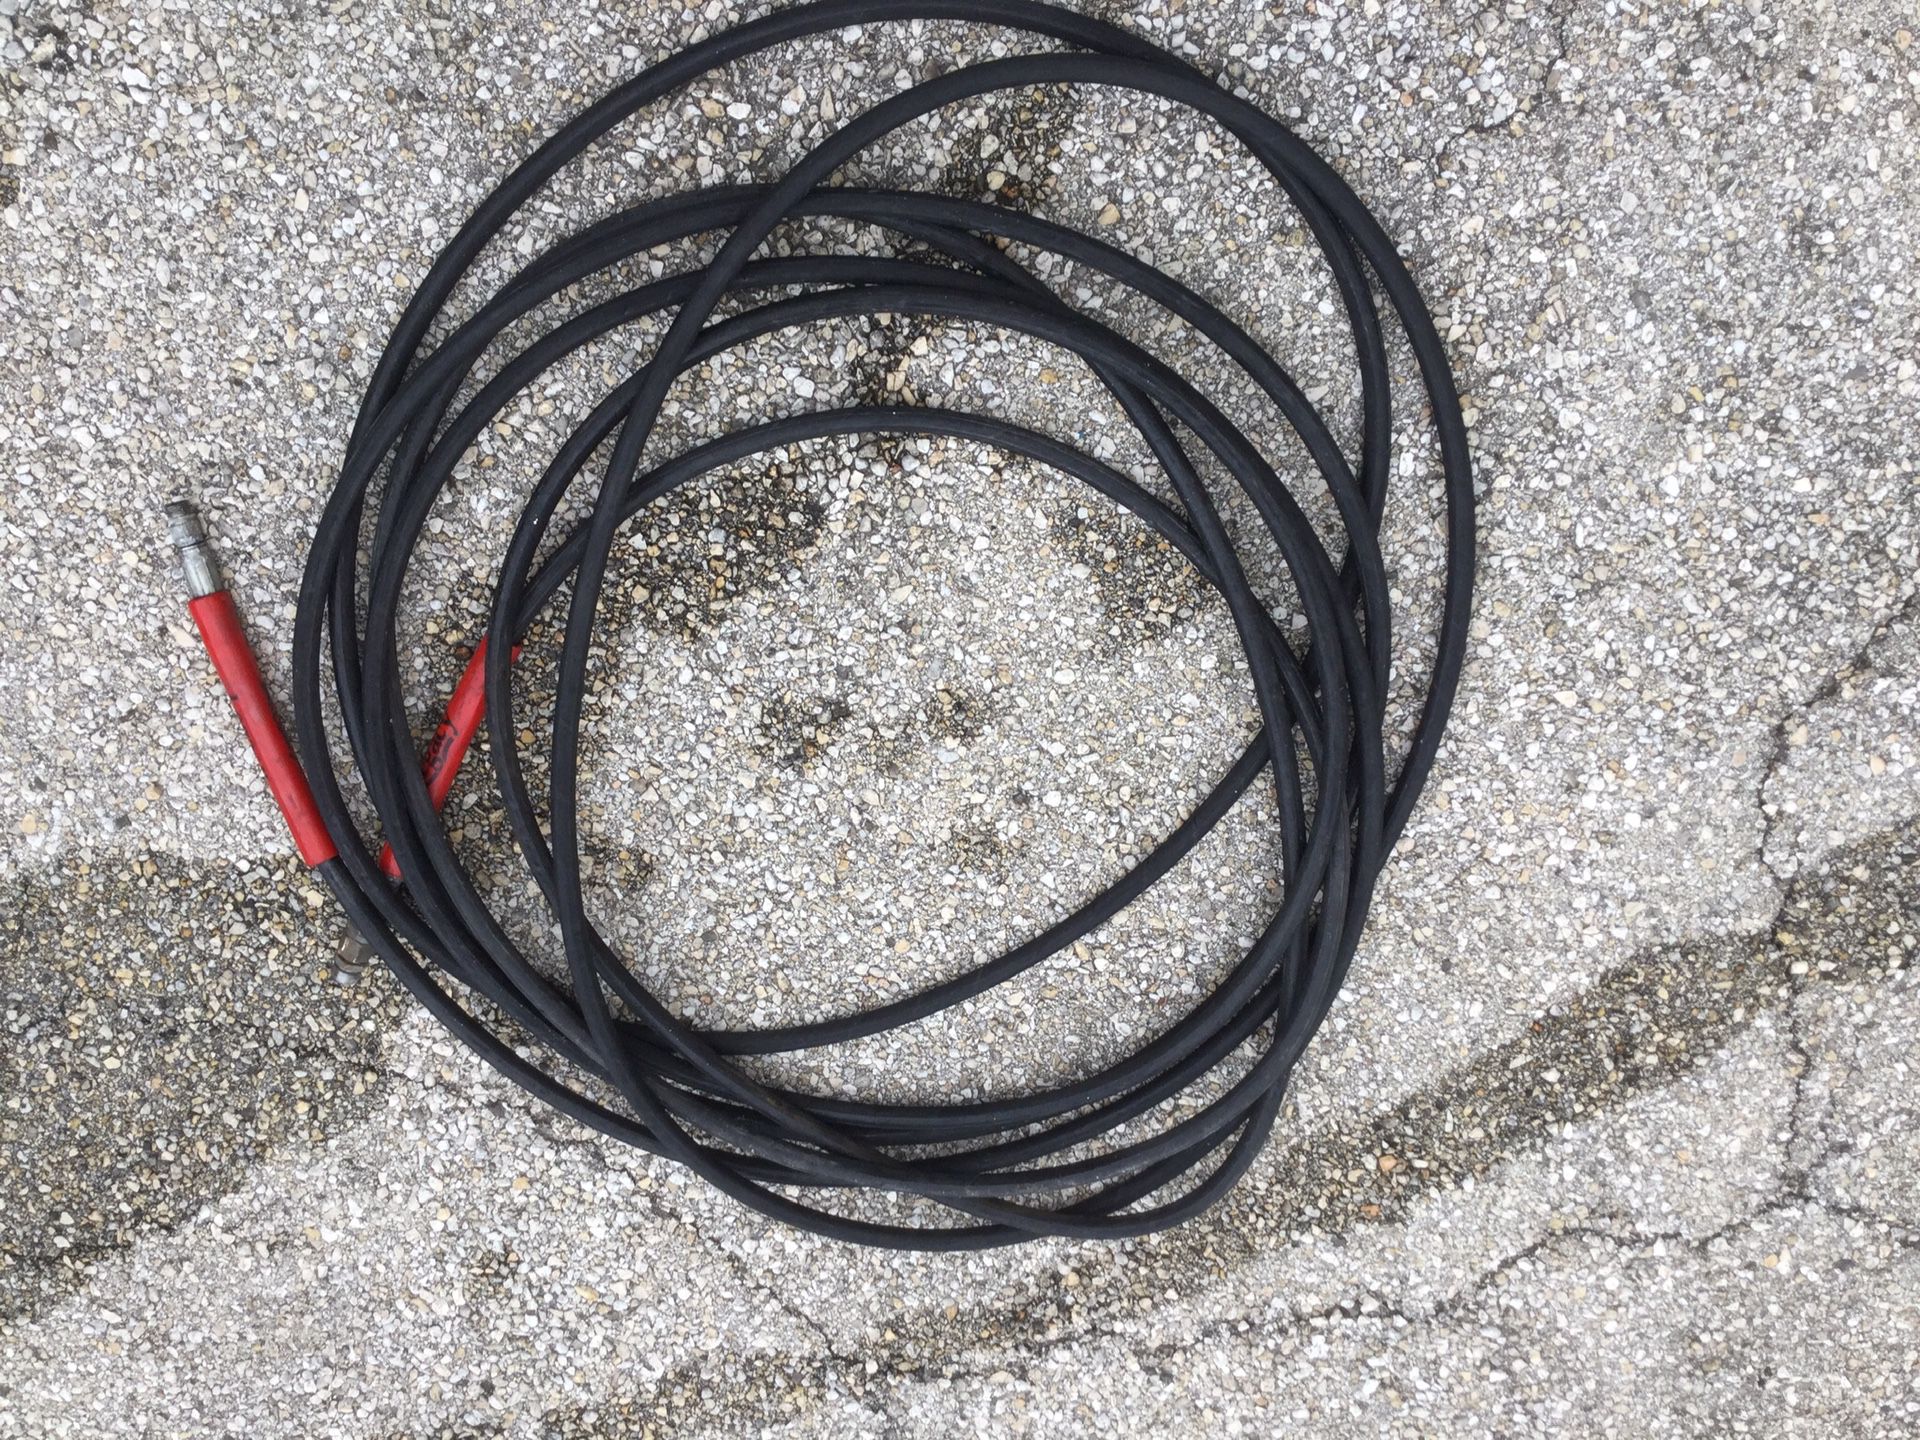 Legacy 5000 psi pressure washer hose 50 ft. And 5000 psi wand